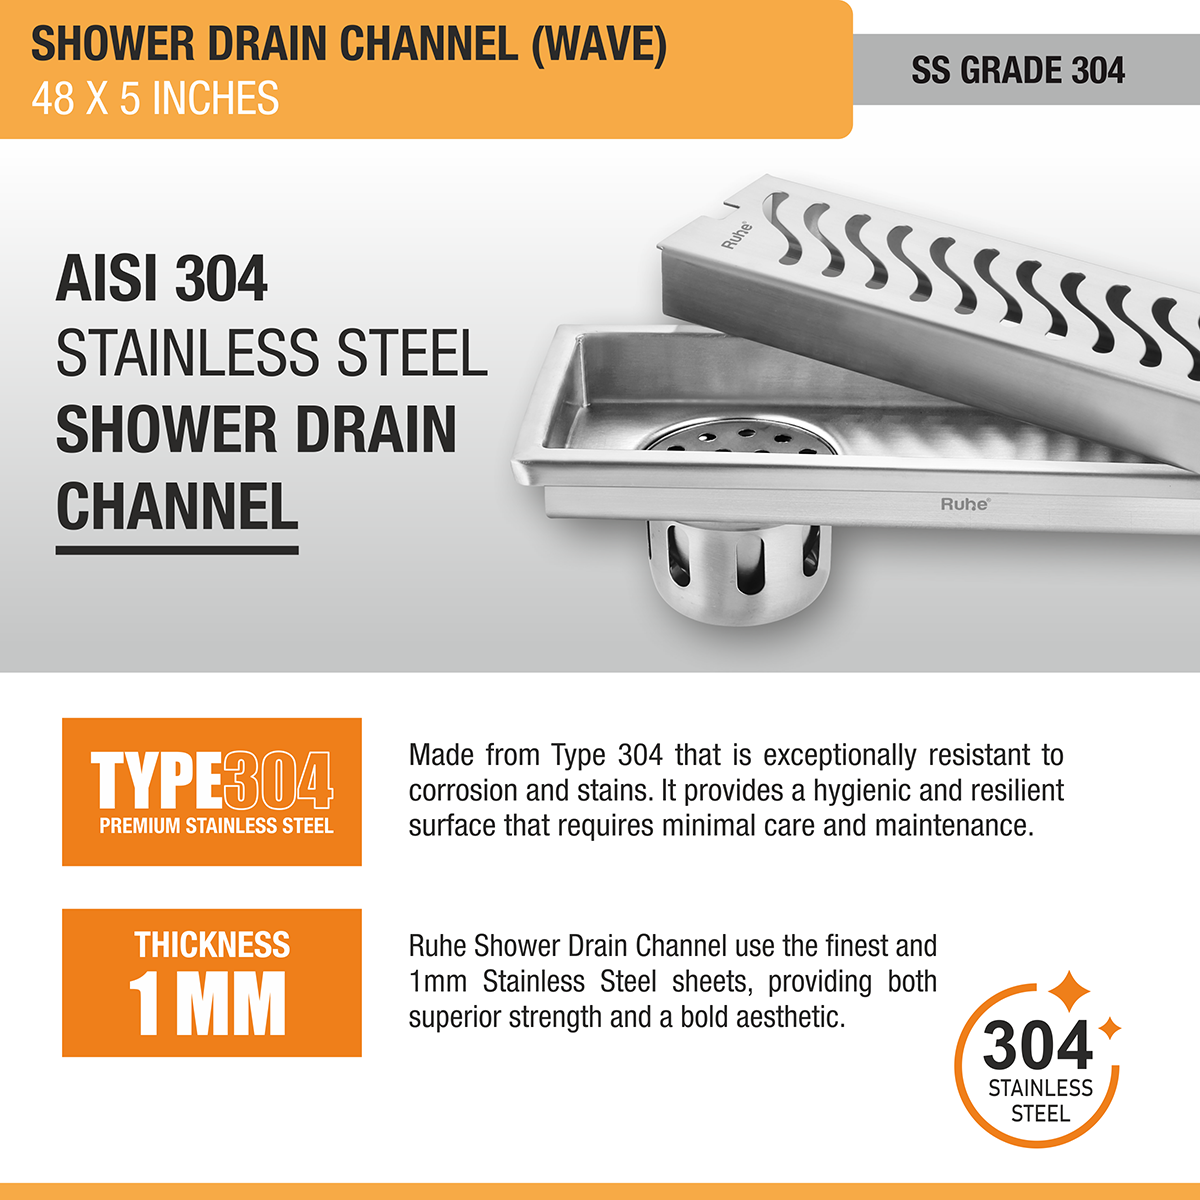 Wave Shower Drain Channel (48 X 5 Inches) with Cockroach Trap (304 Grade) stainless steel